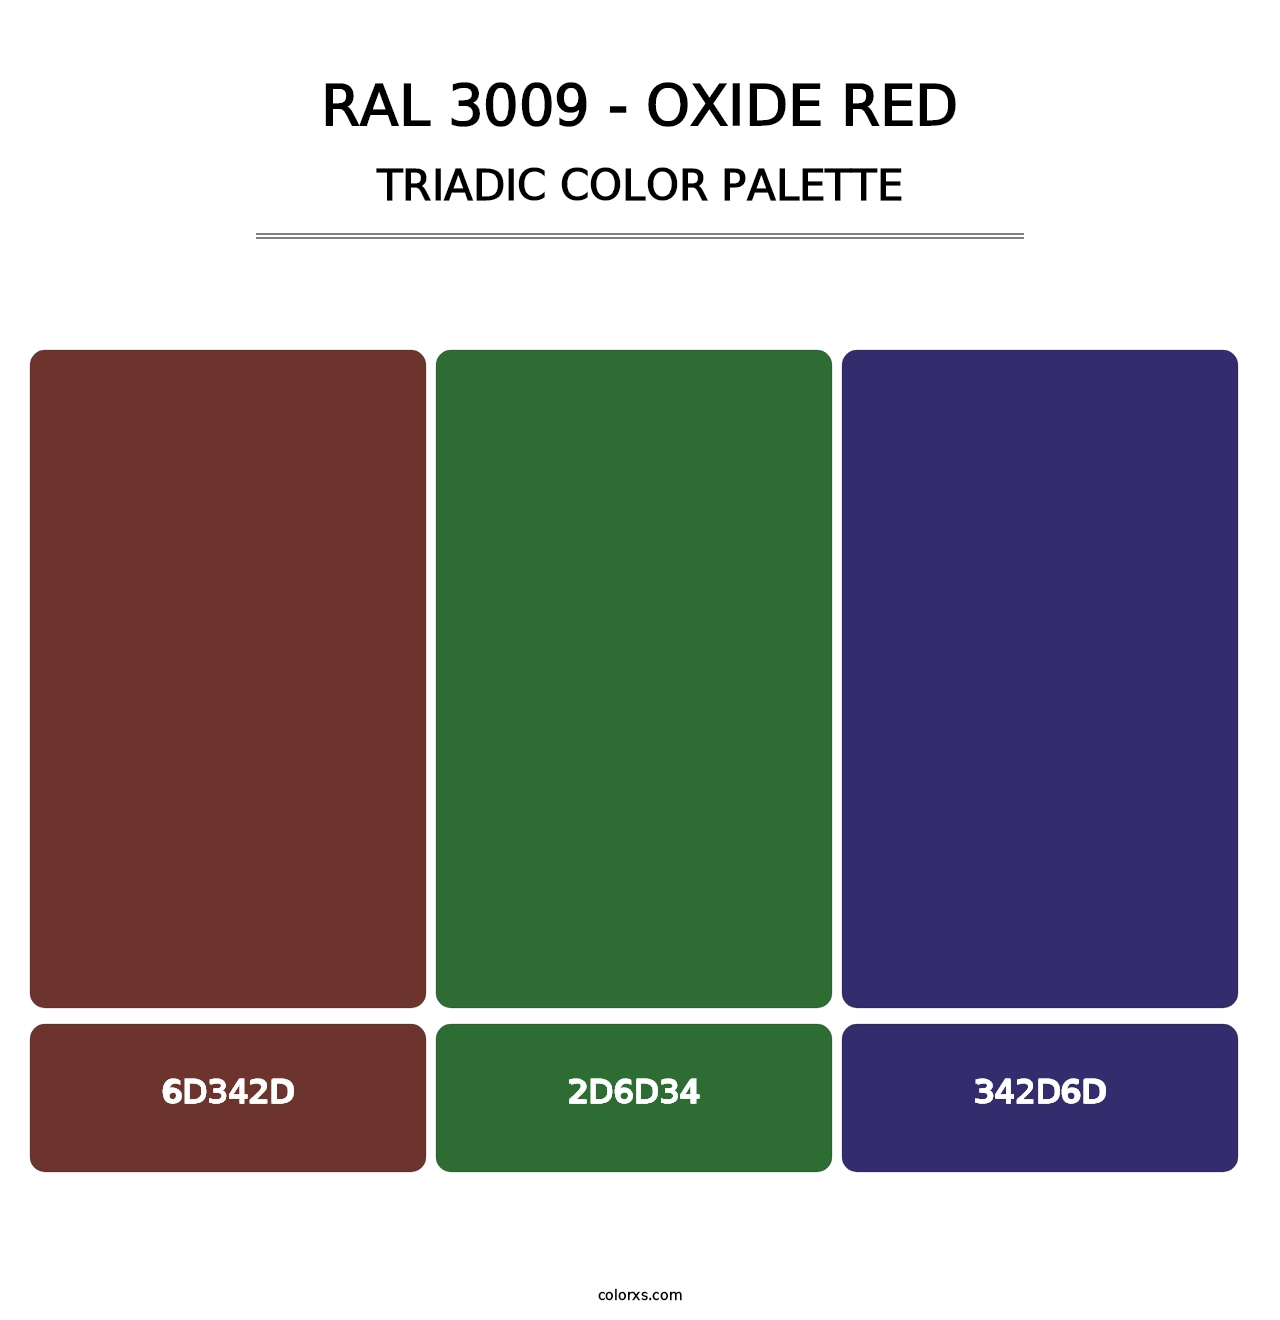 RAL 3009 - Oxide Red - Triadic Color Palette